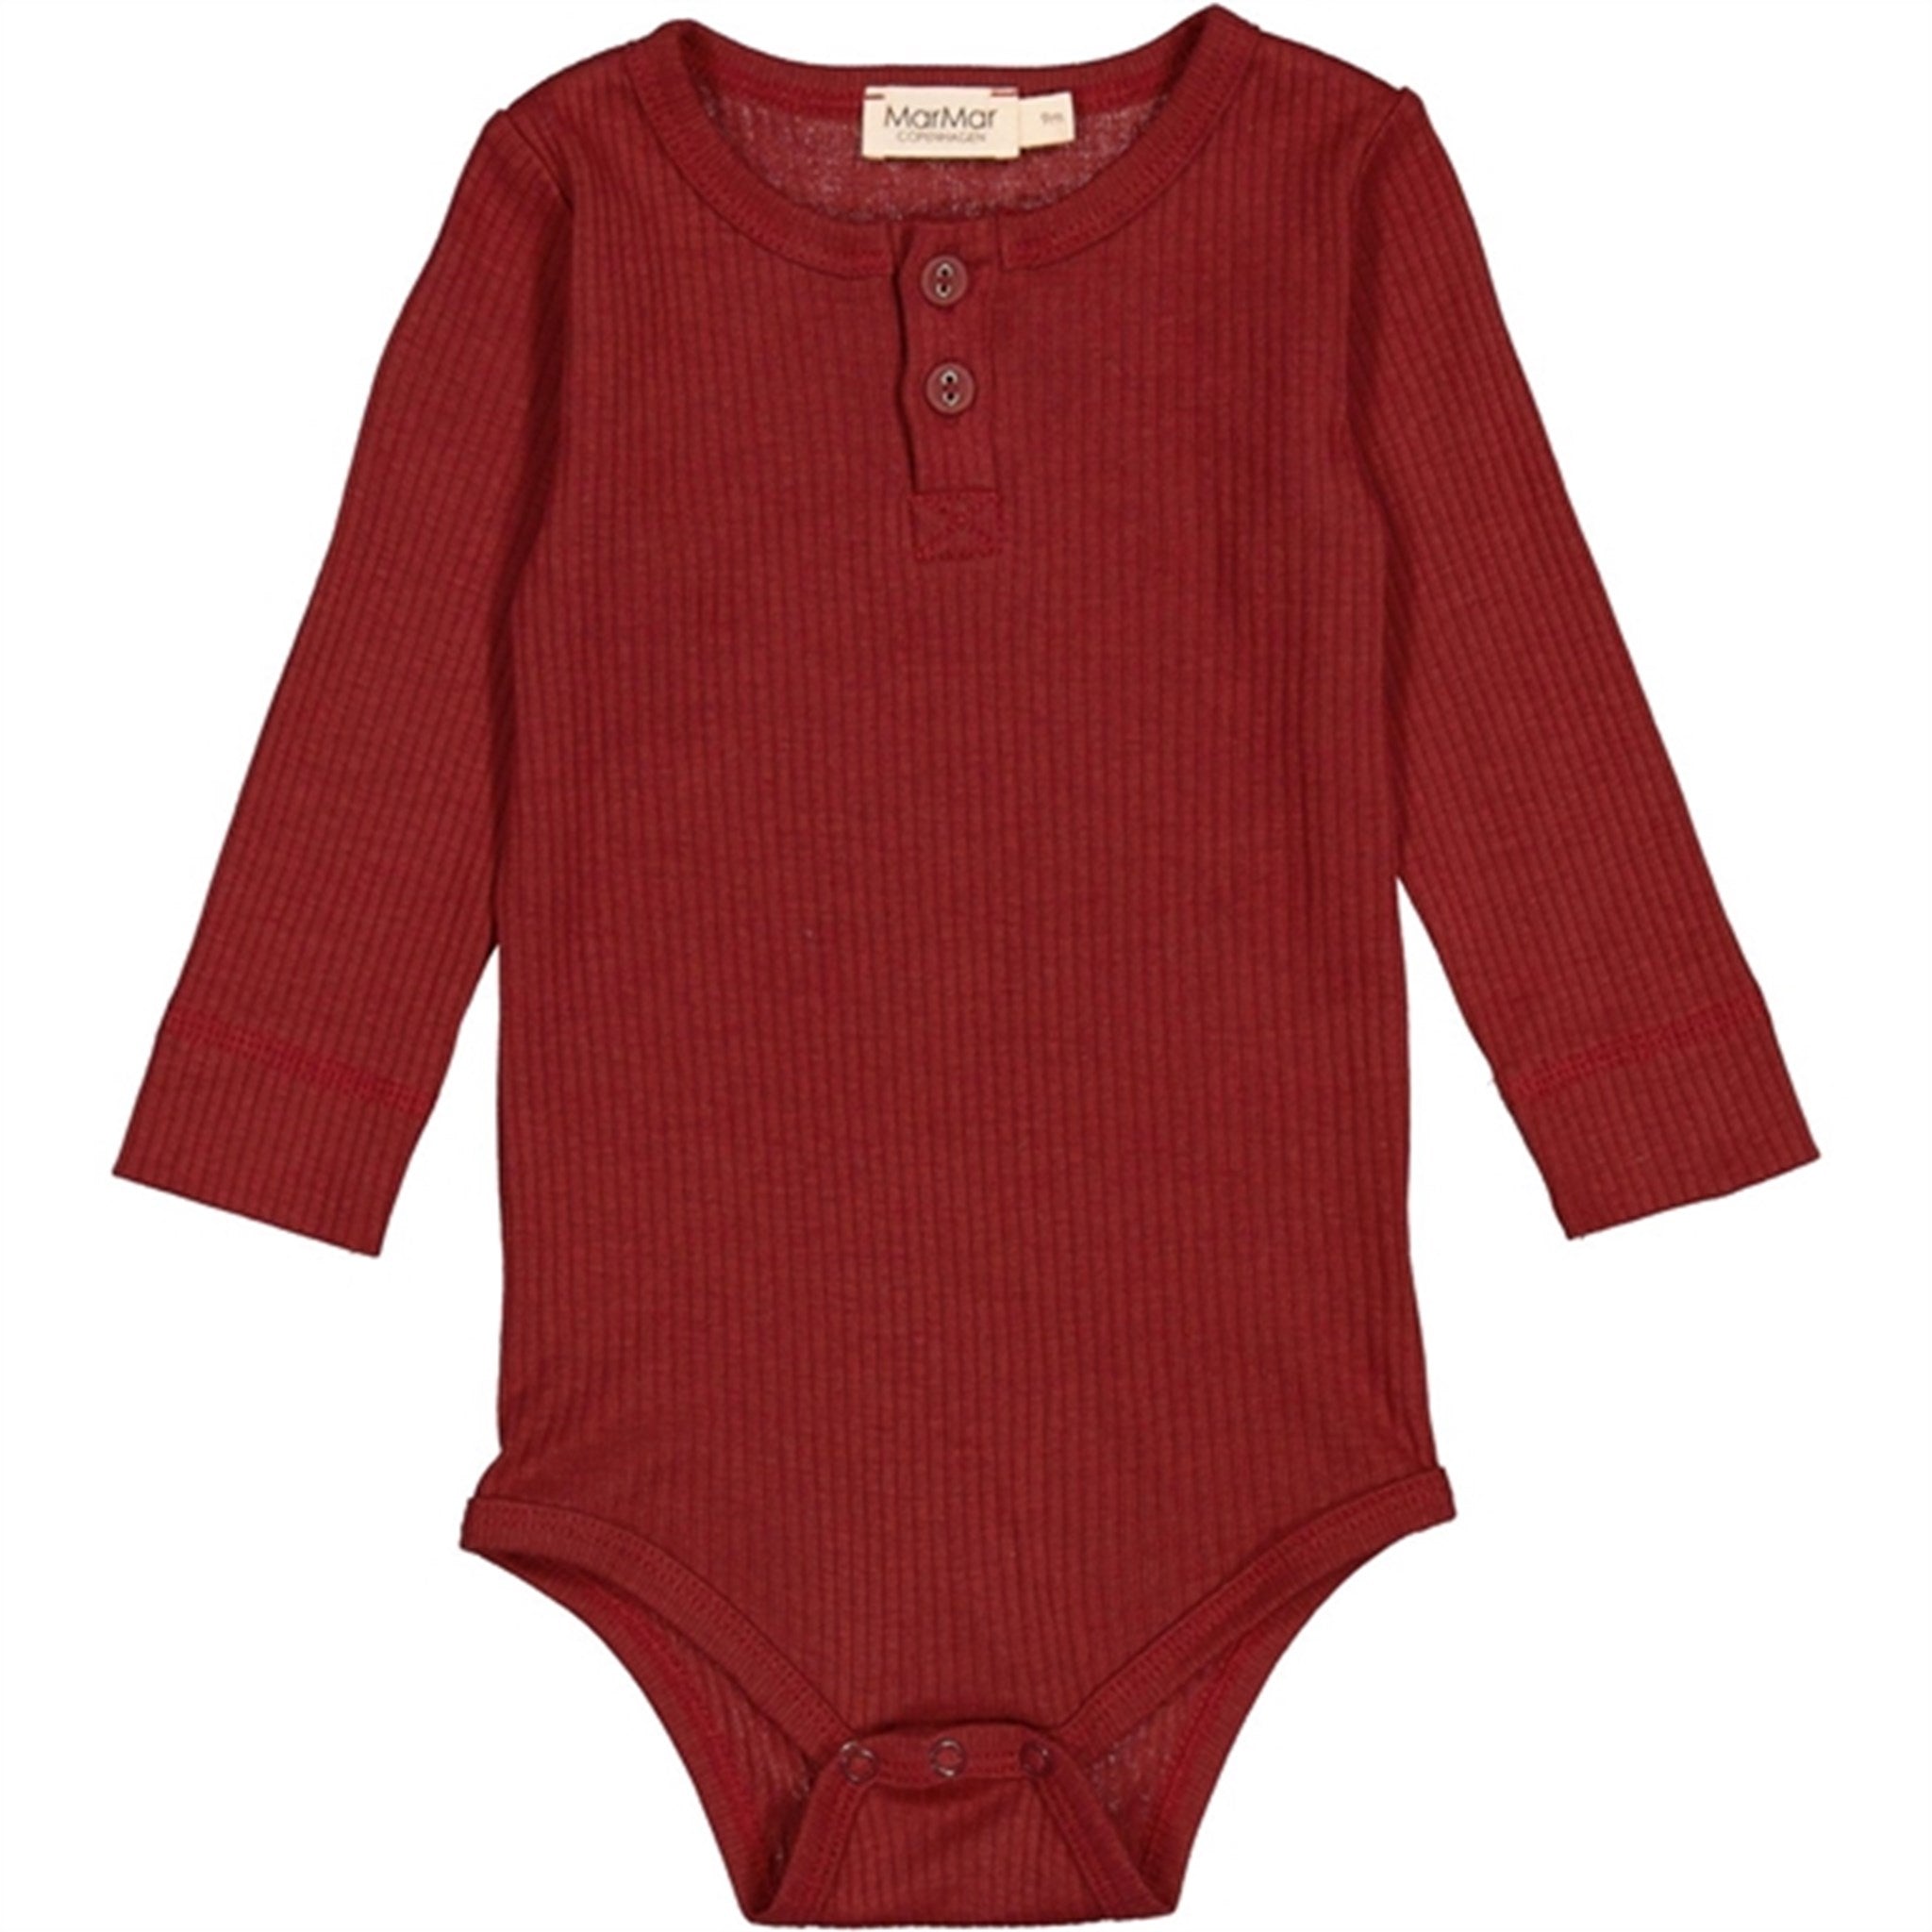 MarMar Modal Hibiscus Red Body